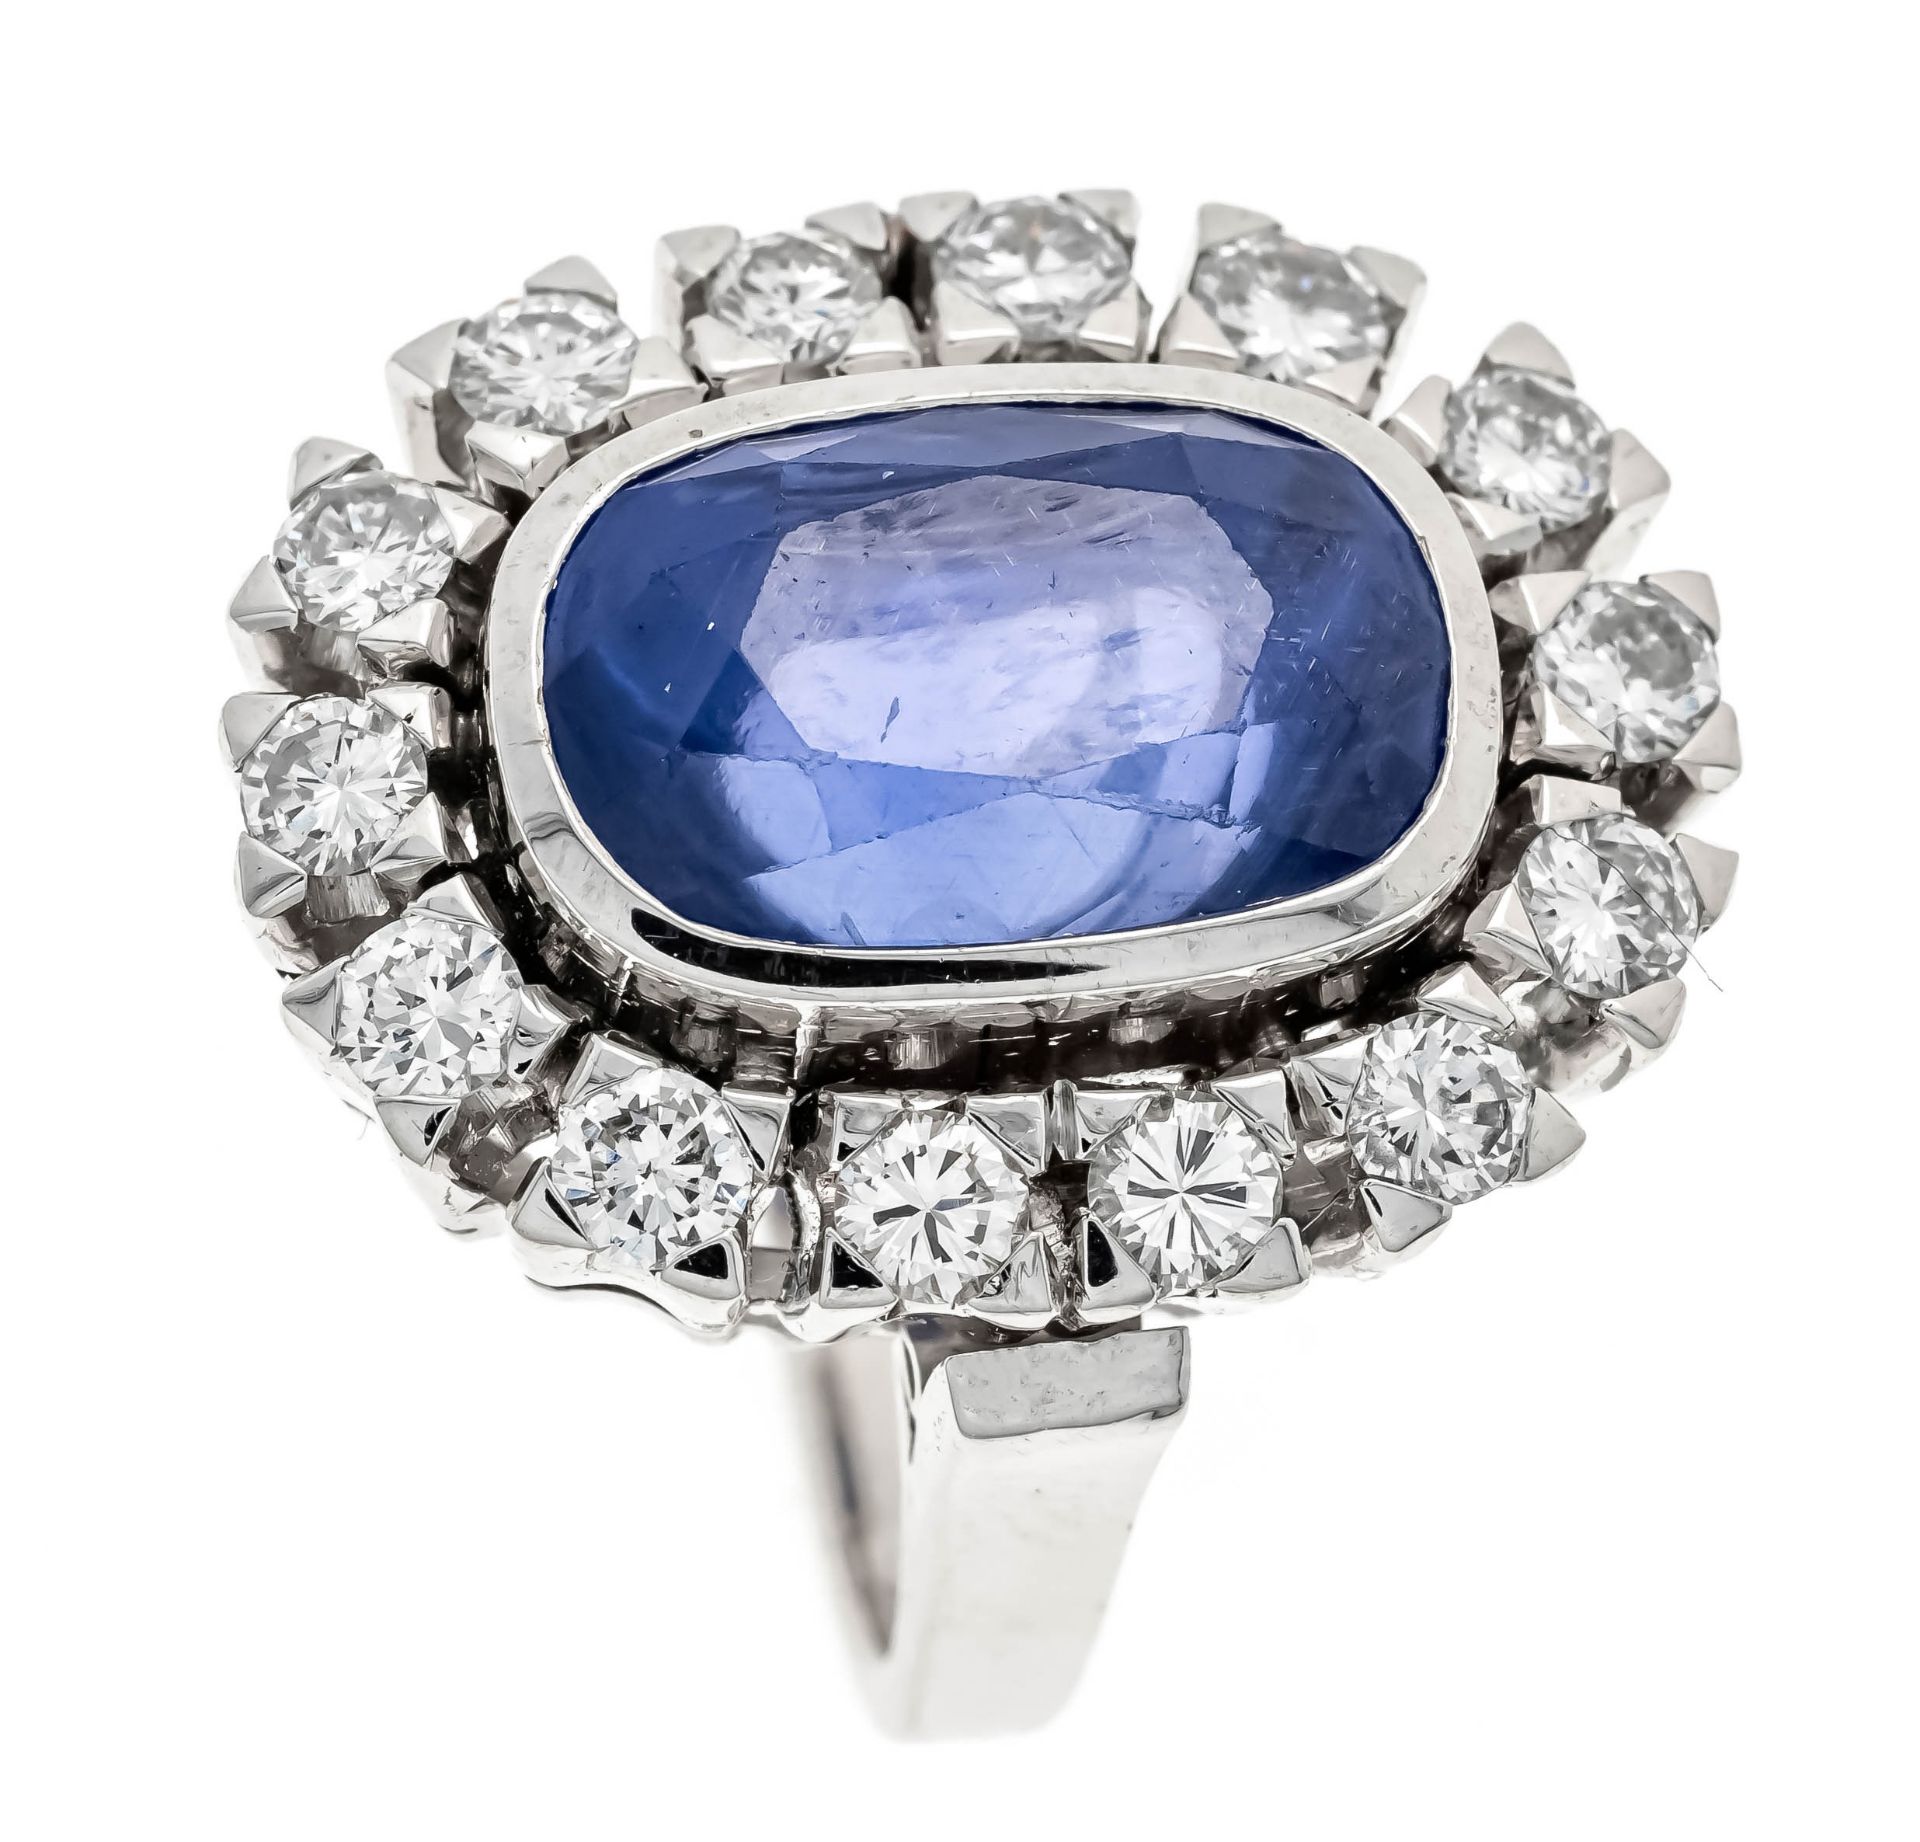 sapphire-brilliant ring WG 585/000 with a mixed cut faceted sapphire (upper part oval faceted, lower